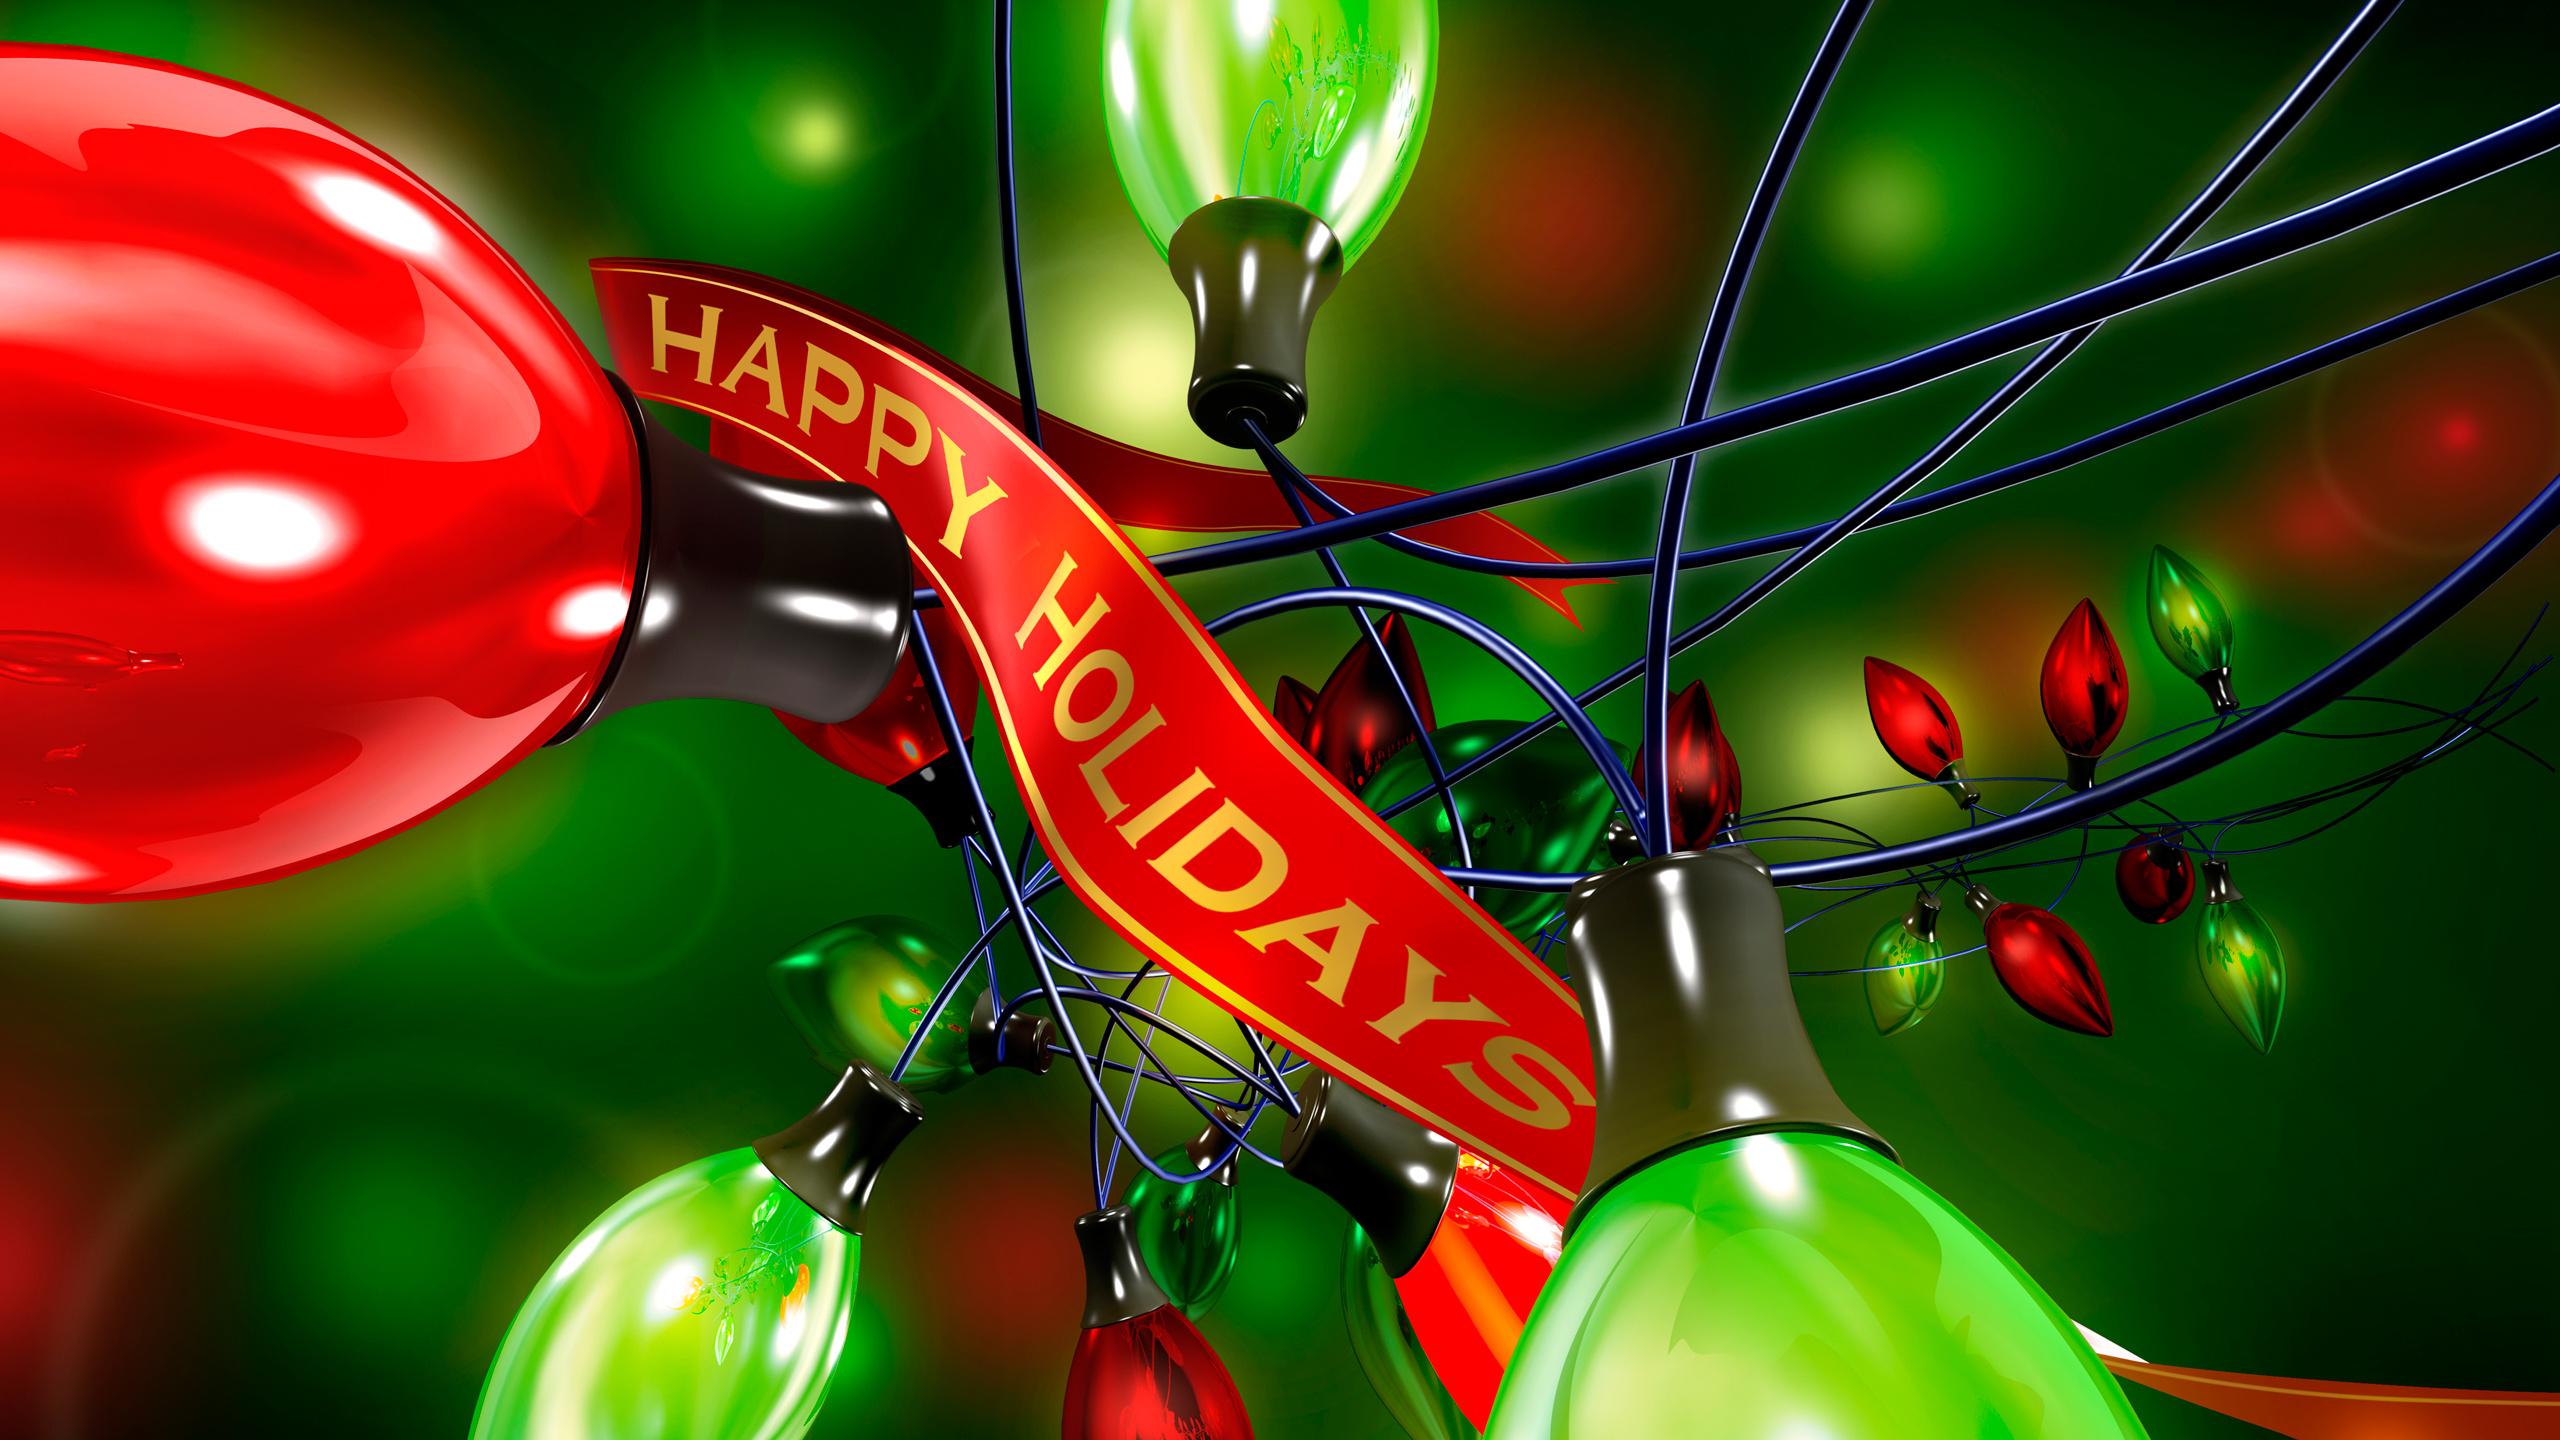 Birthday, Green, Red, Christmas Ornament, Christmas Decoration. Wallpaper in 2560x1440 Resolution